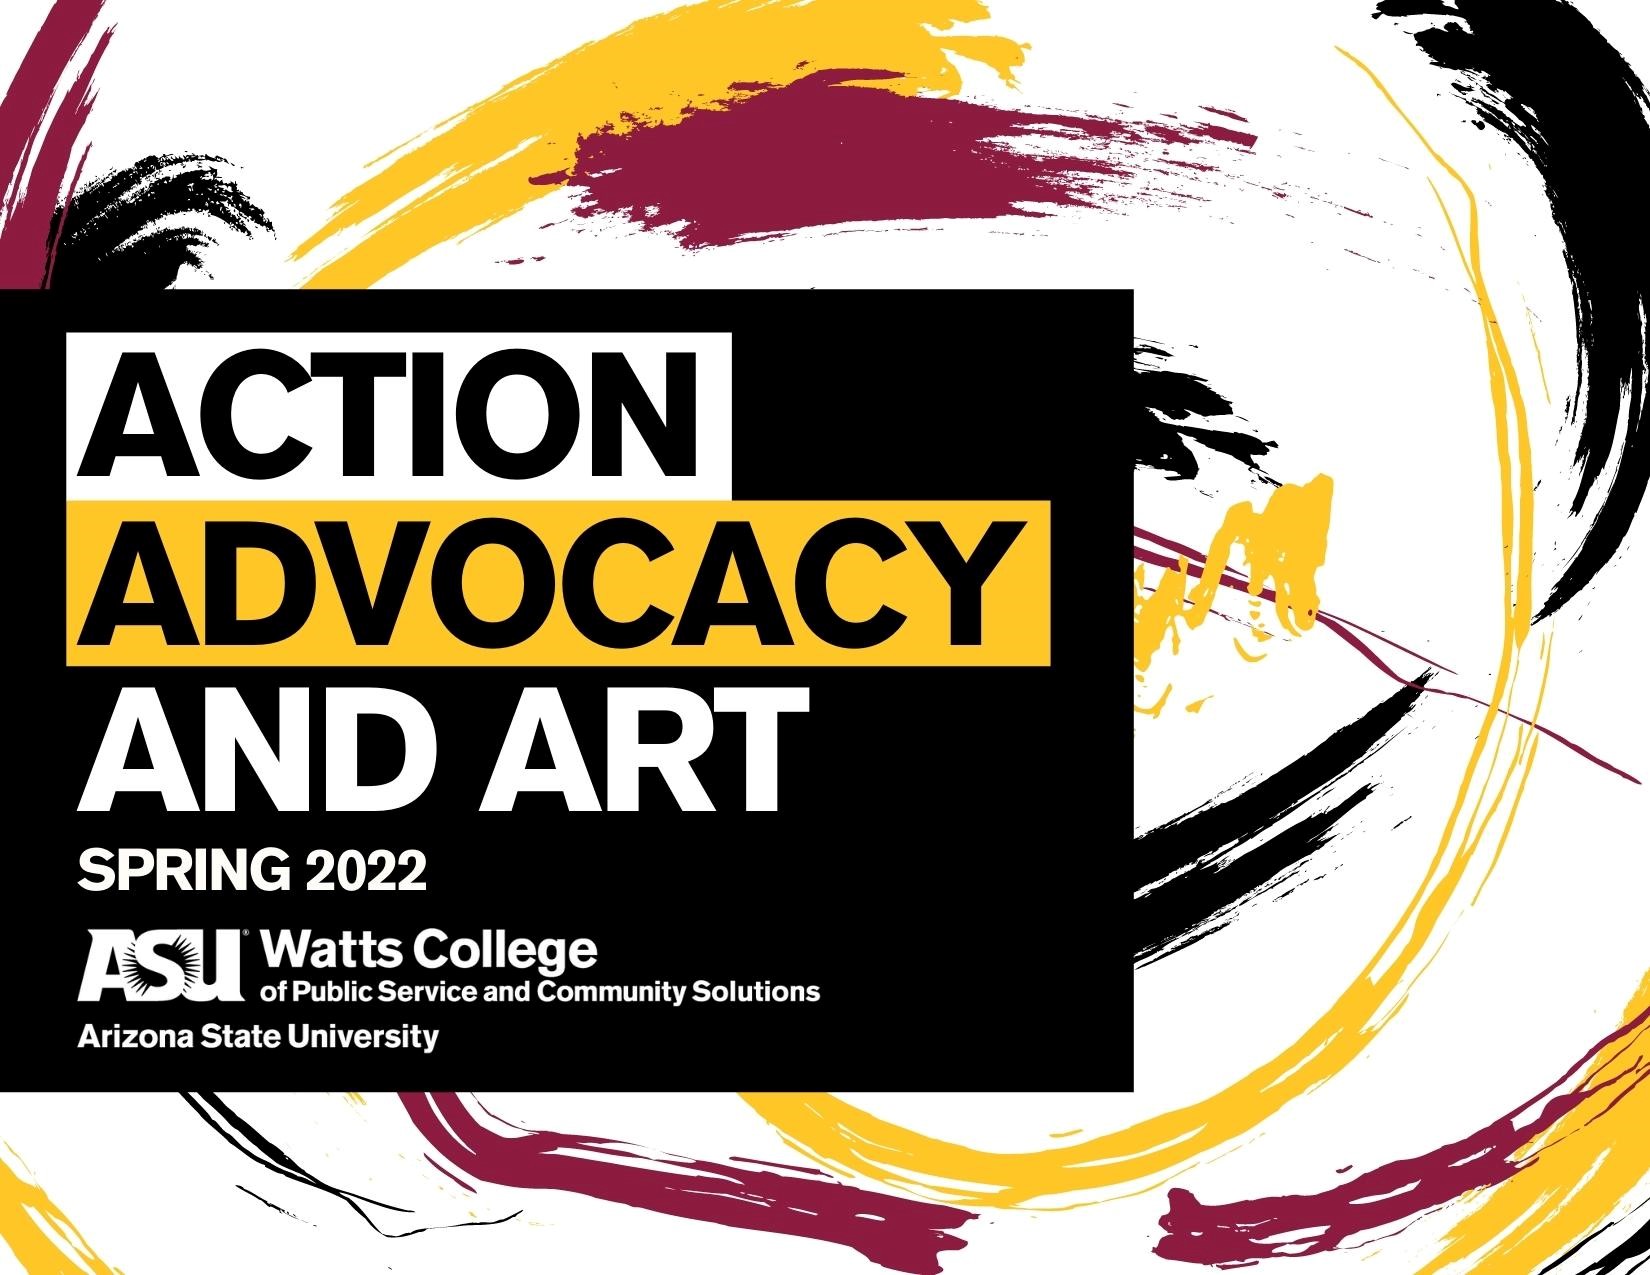 Logo, Action Advocacy and Art, Watts College, 